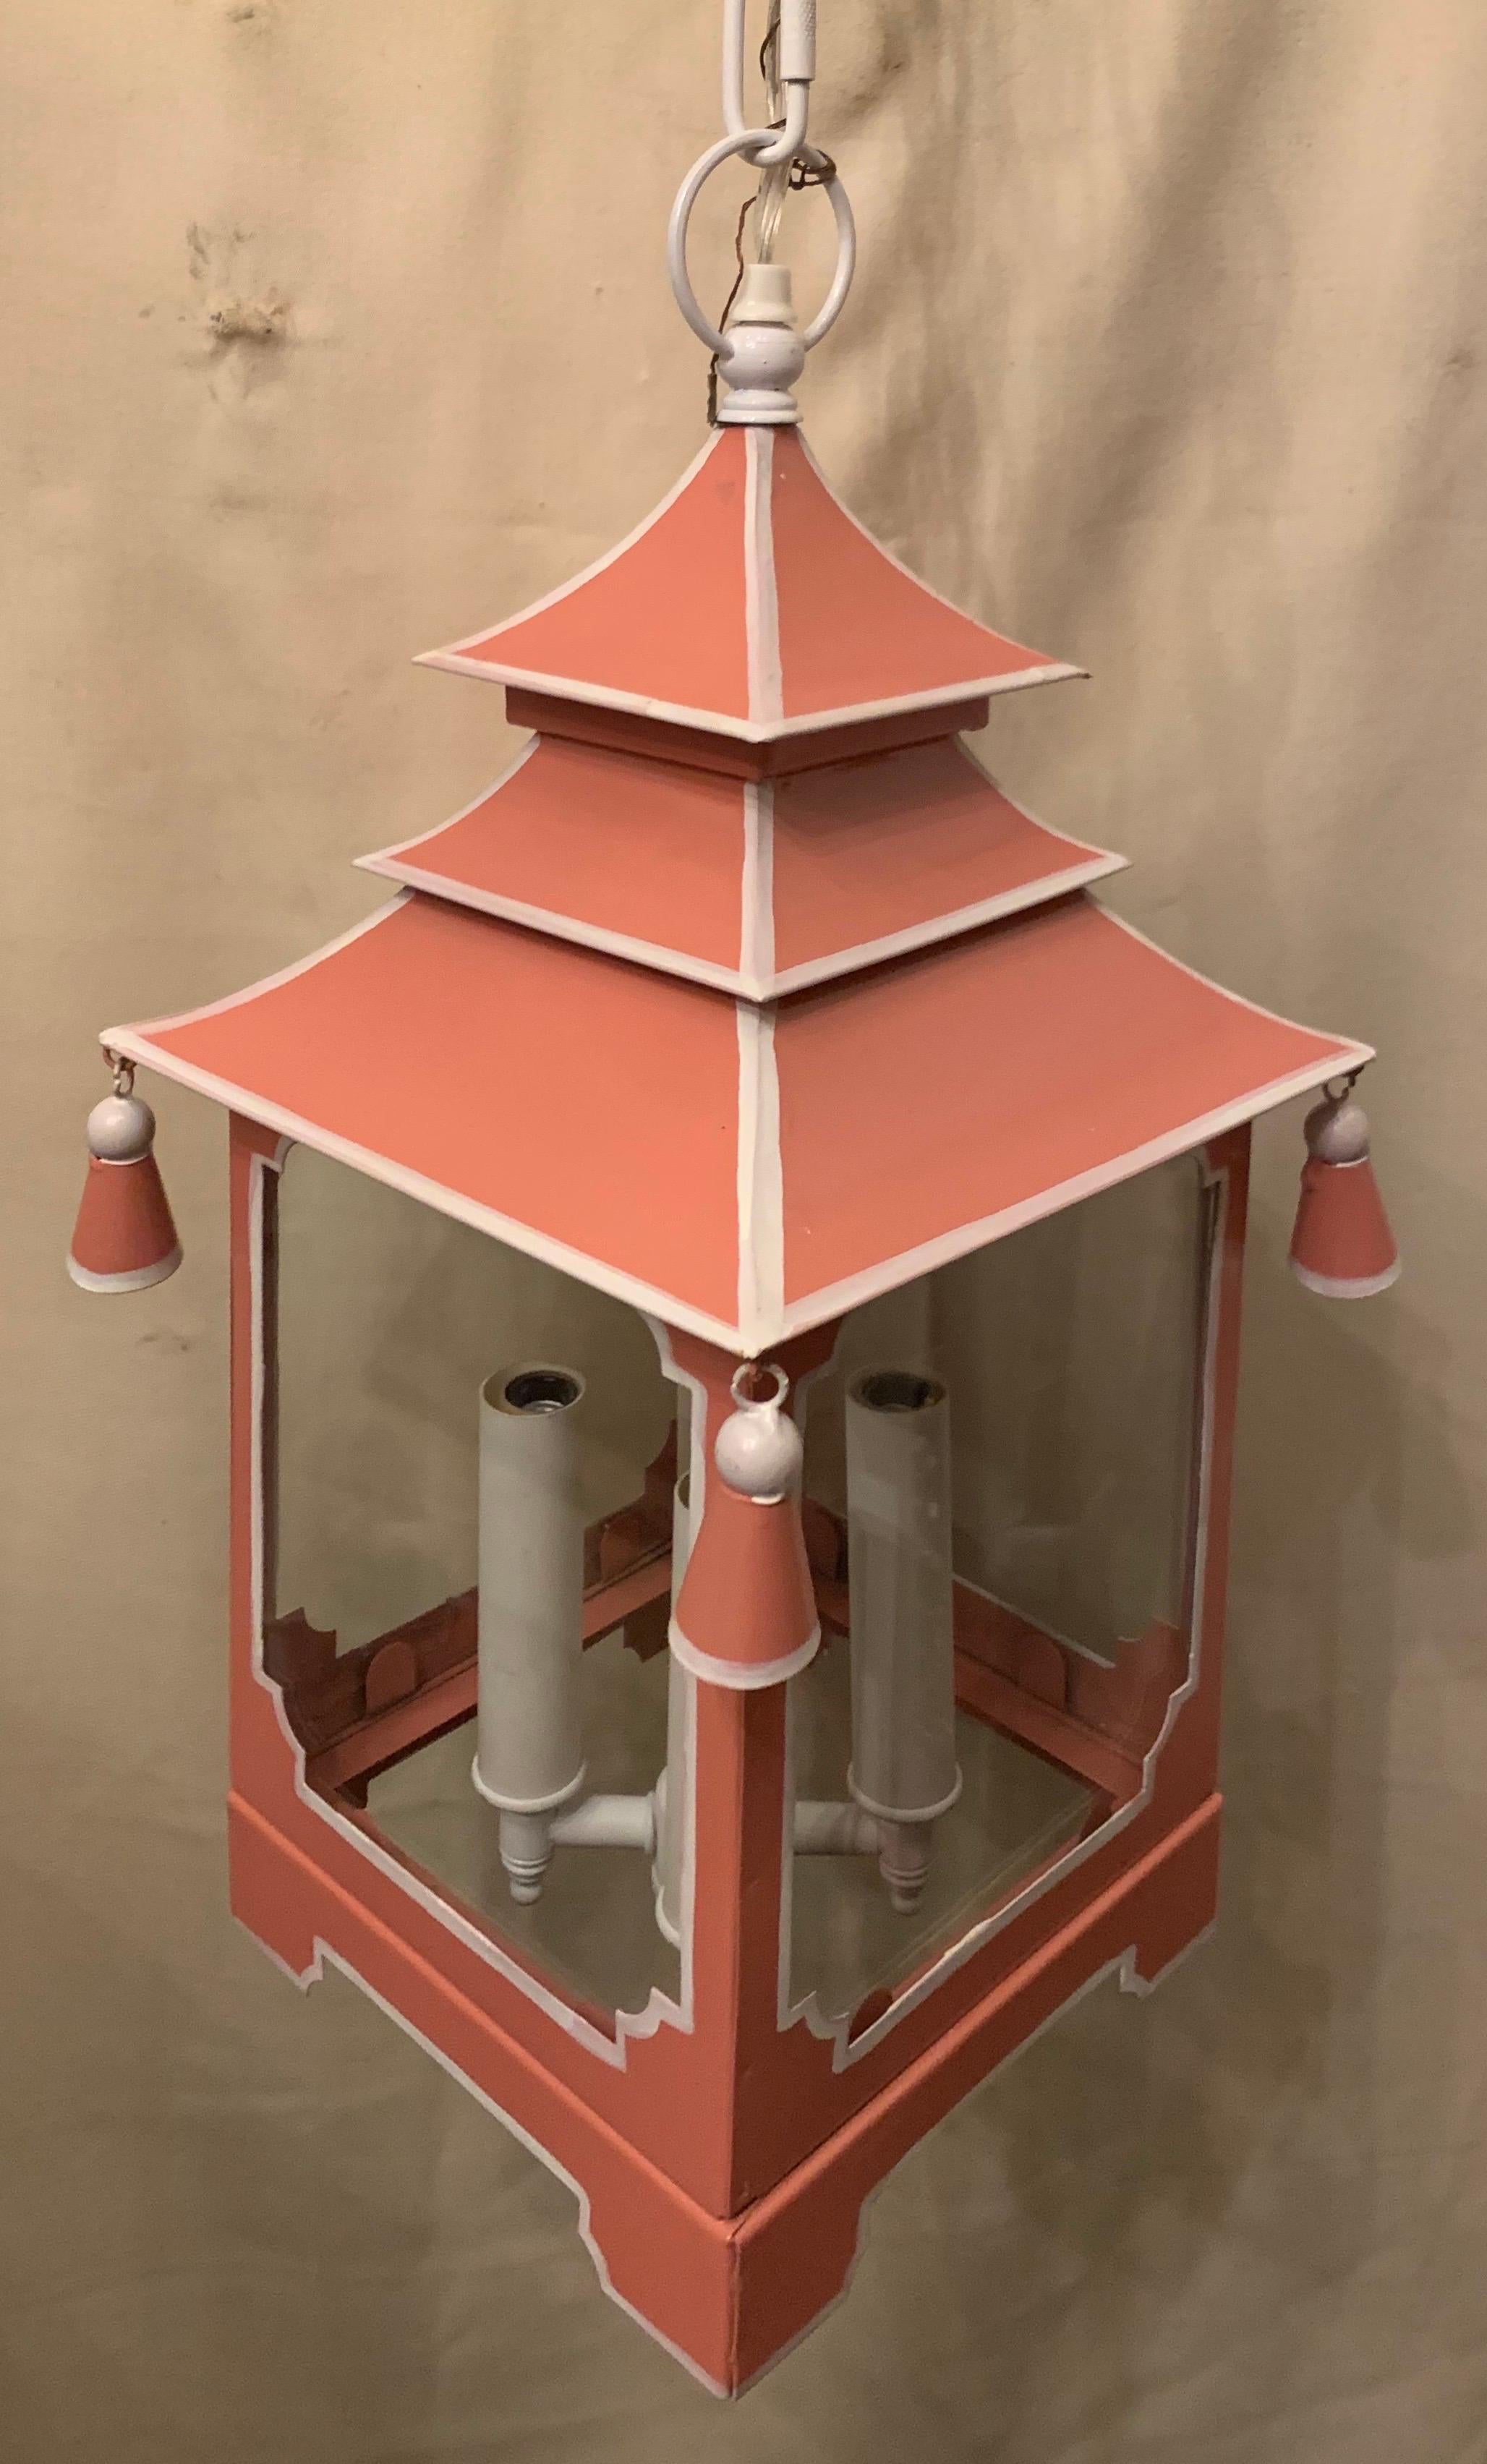 Painted Chinoiserie Pagoda Salmon Pink and White Enameled Glass Lantern Fixture For Sale